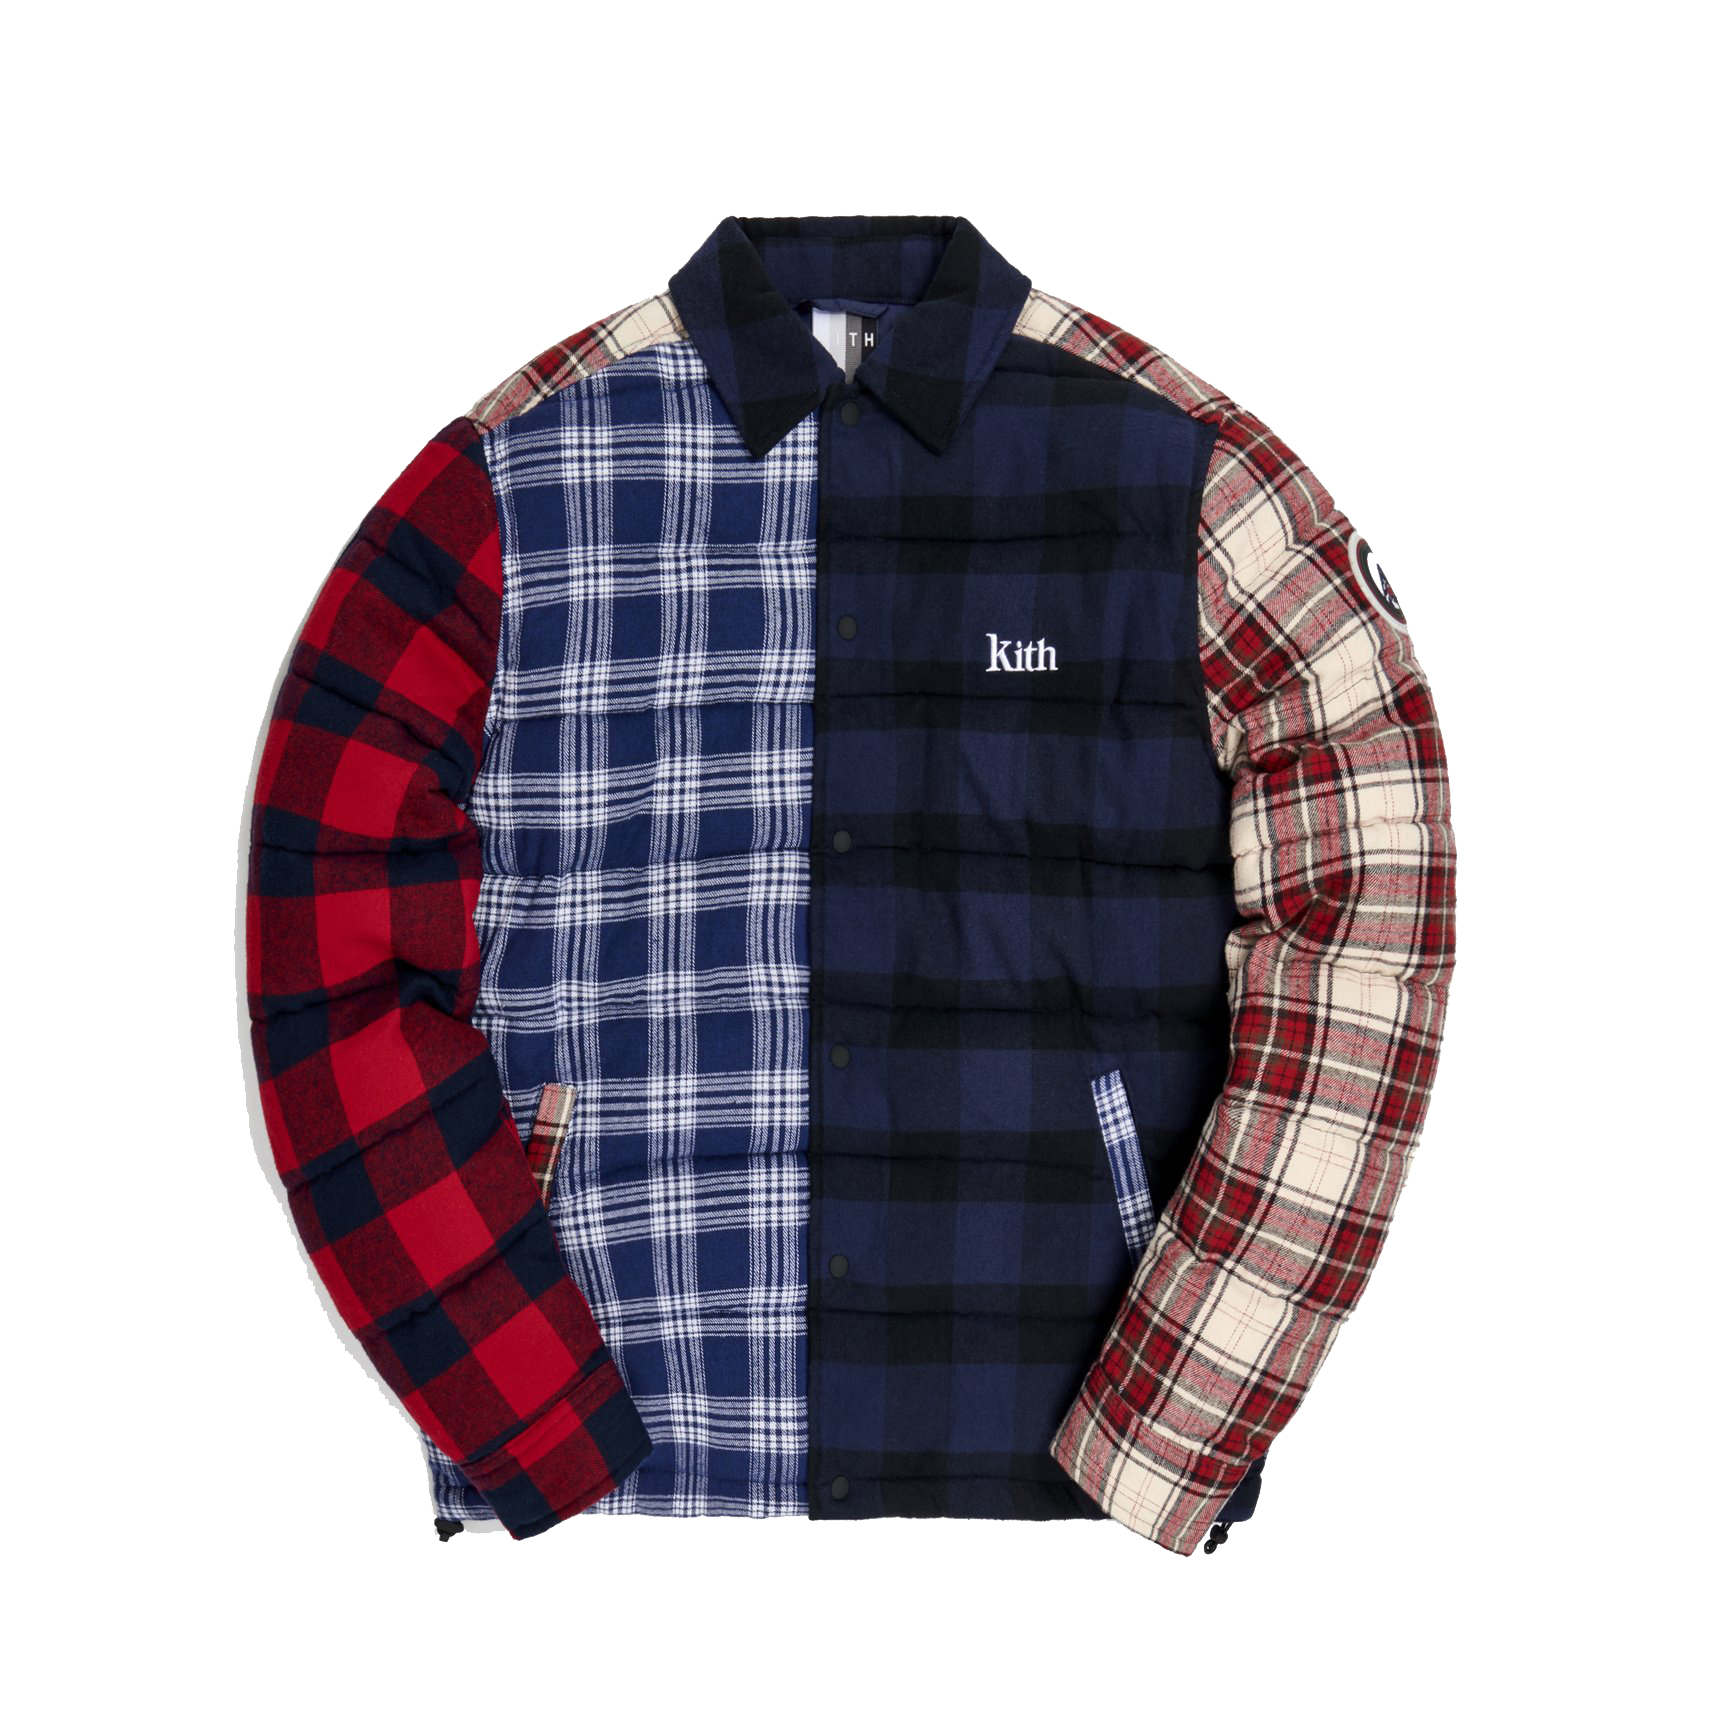 Kith Murray Quilted Shirt Jacket Plaid/Multi - FW20 Men's - US